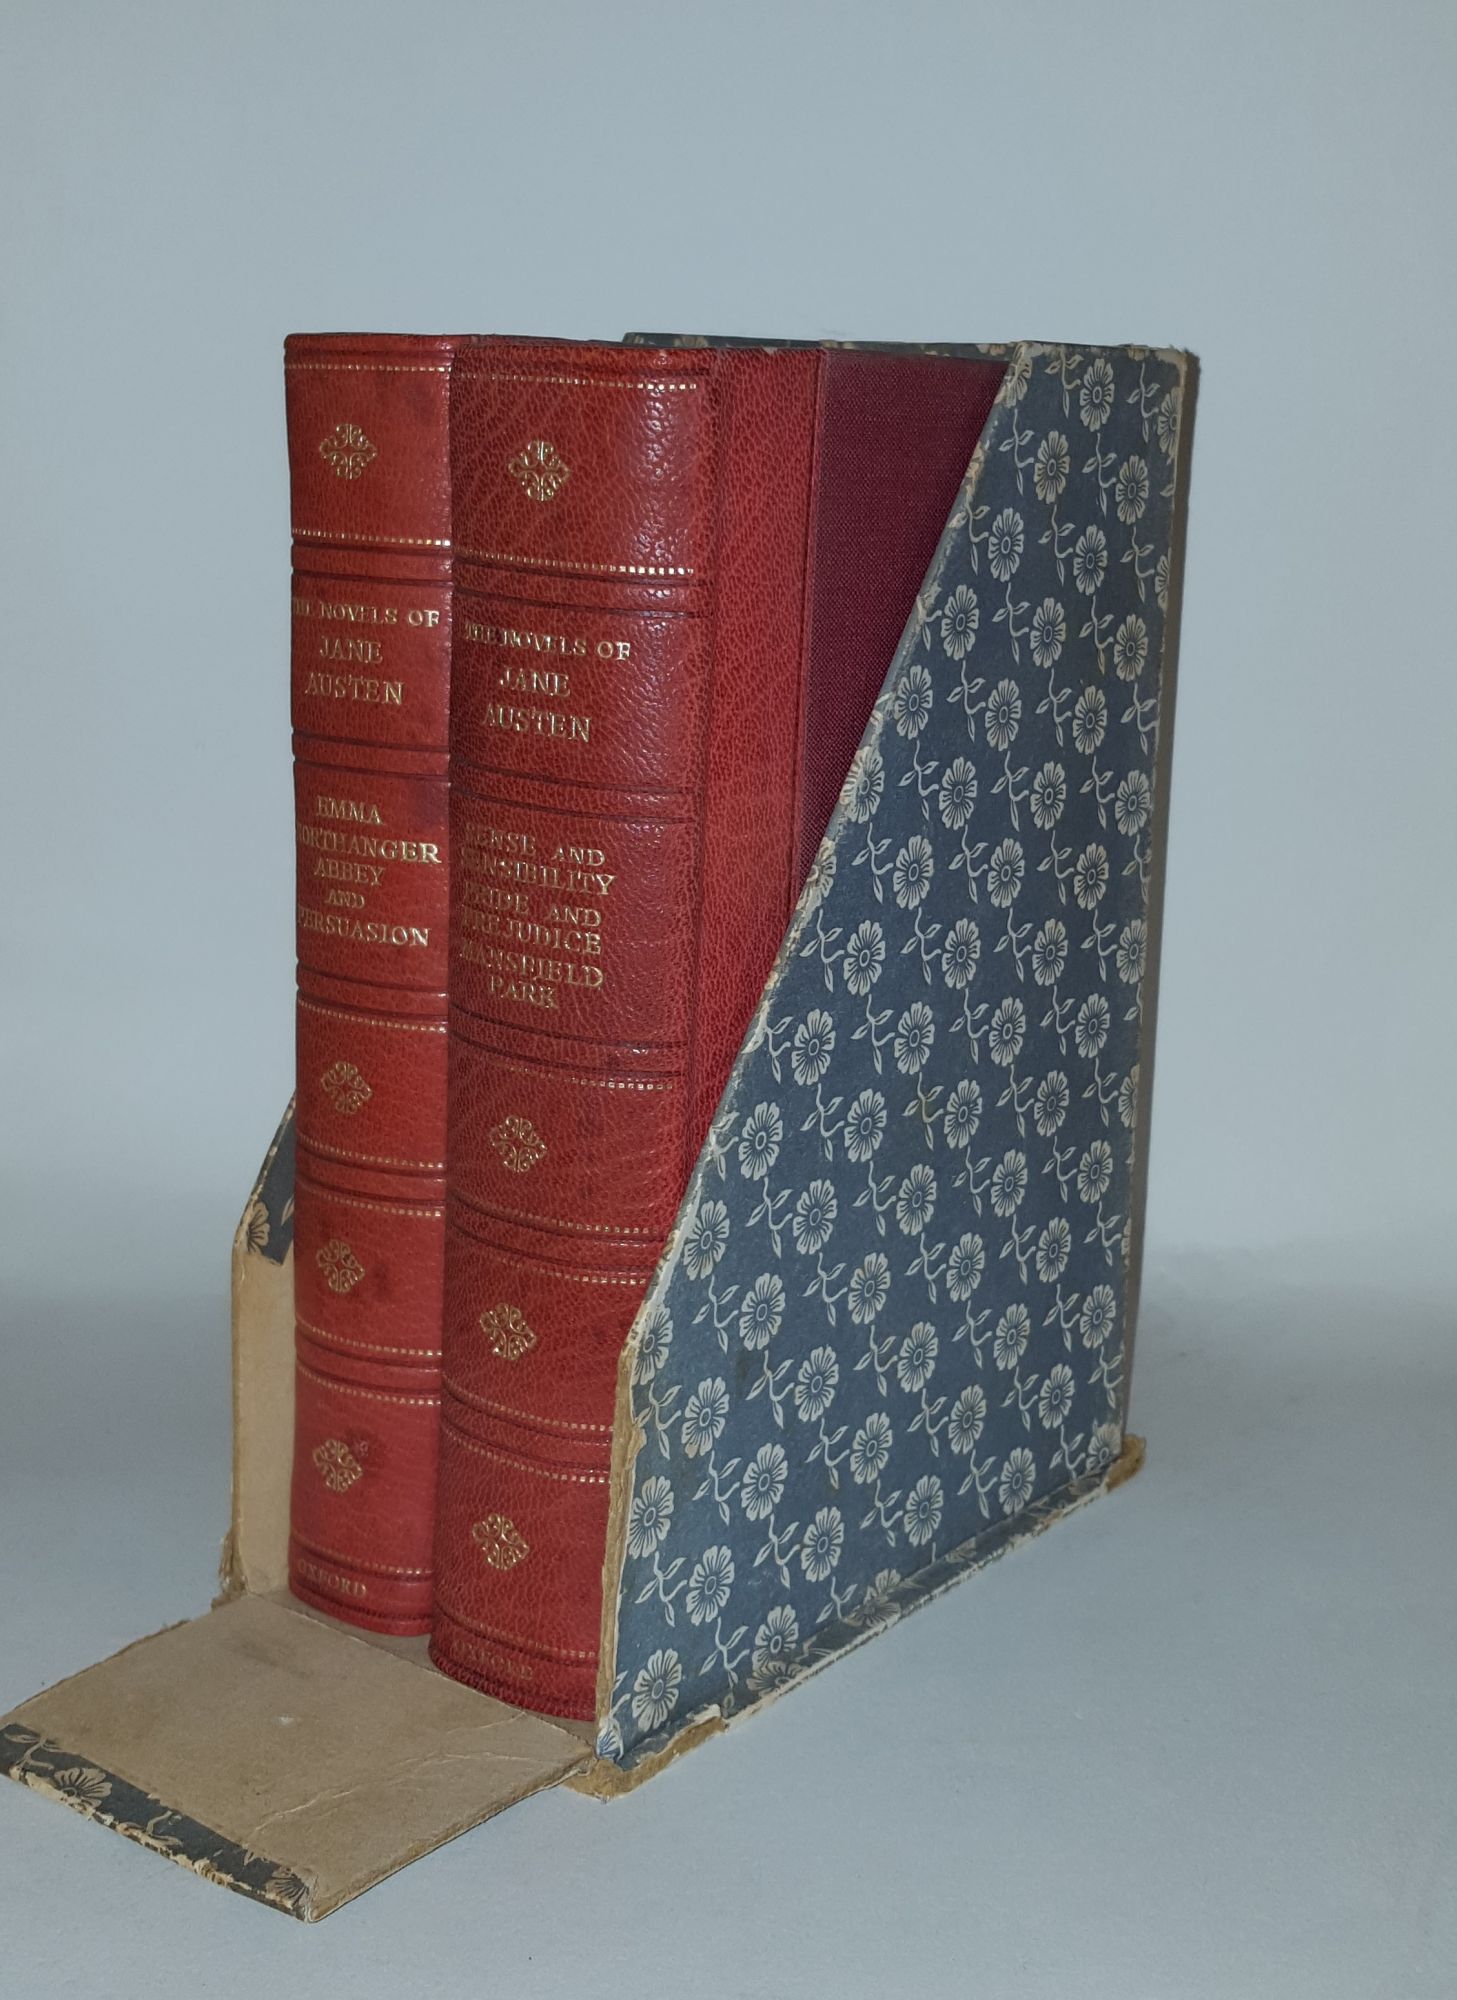 AUSTEN Jane, CHAPMAN R.W. - The Novels of Jane Austen the Text Based on Collation of the Early Editions in Five Volumes